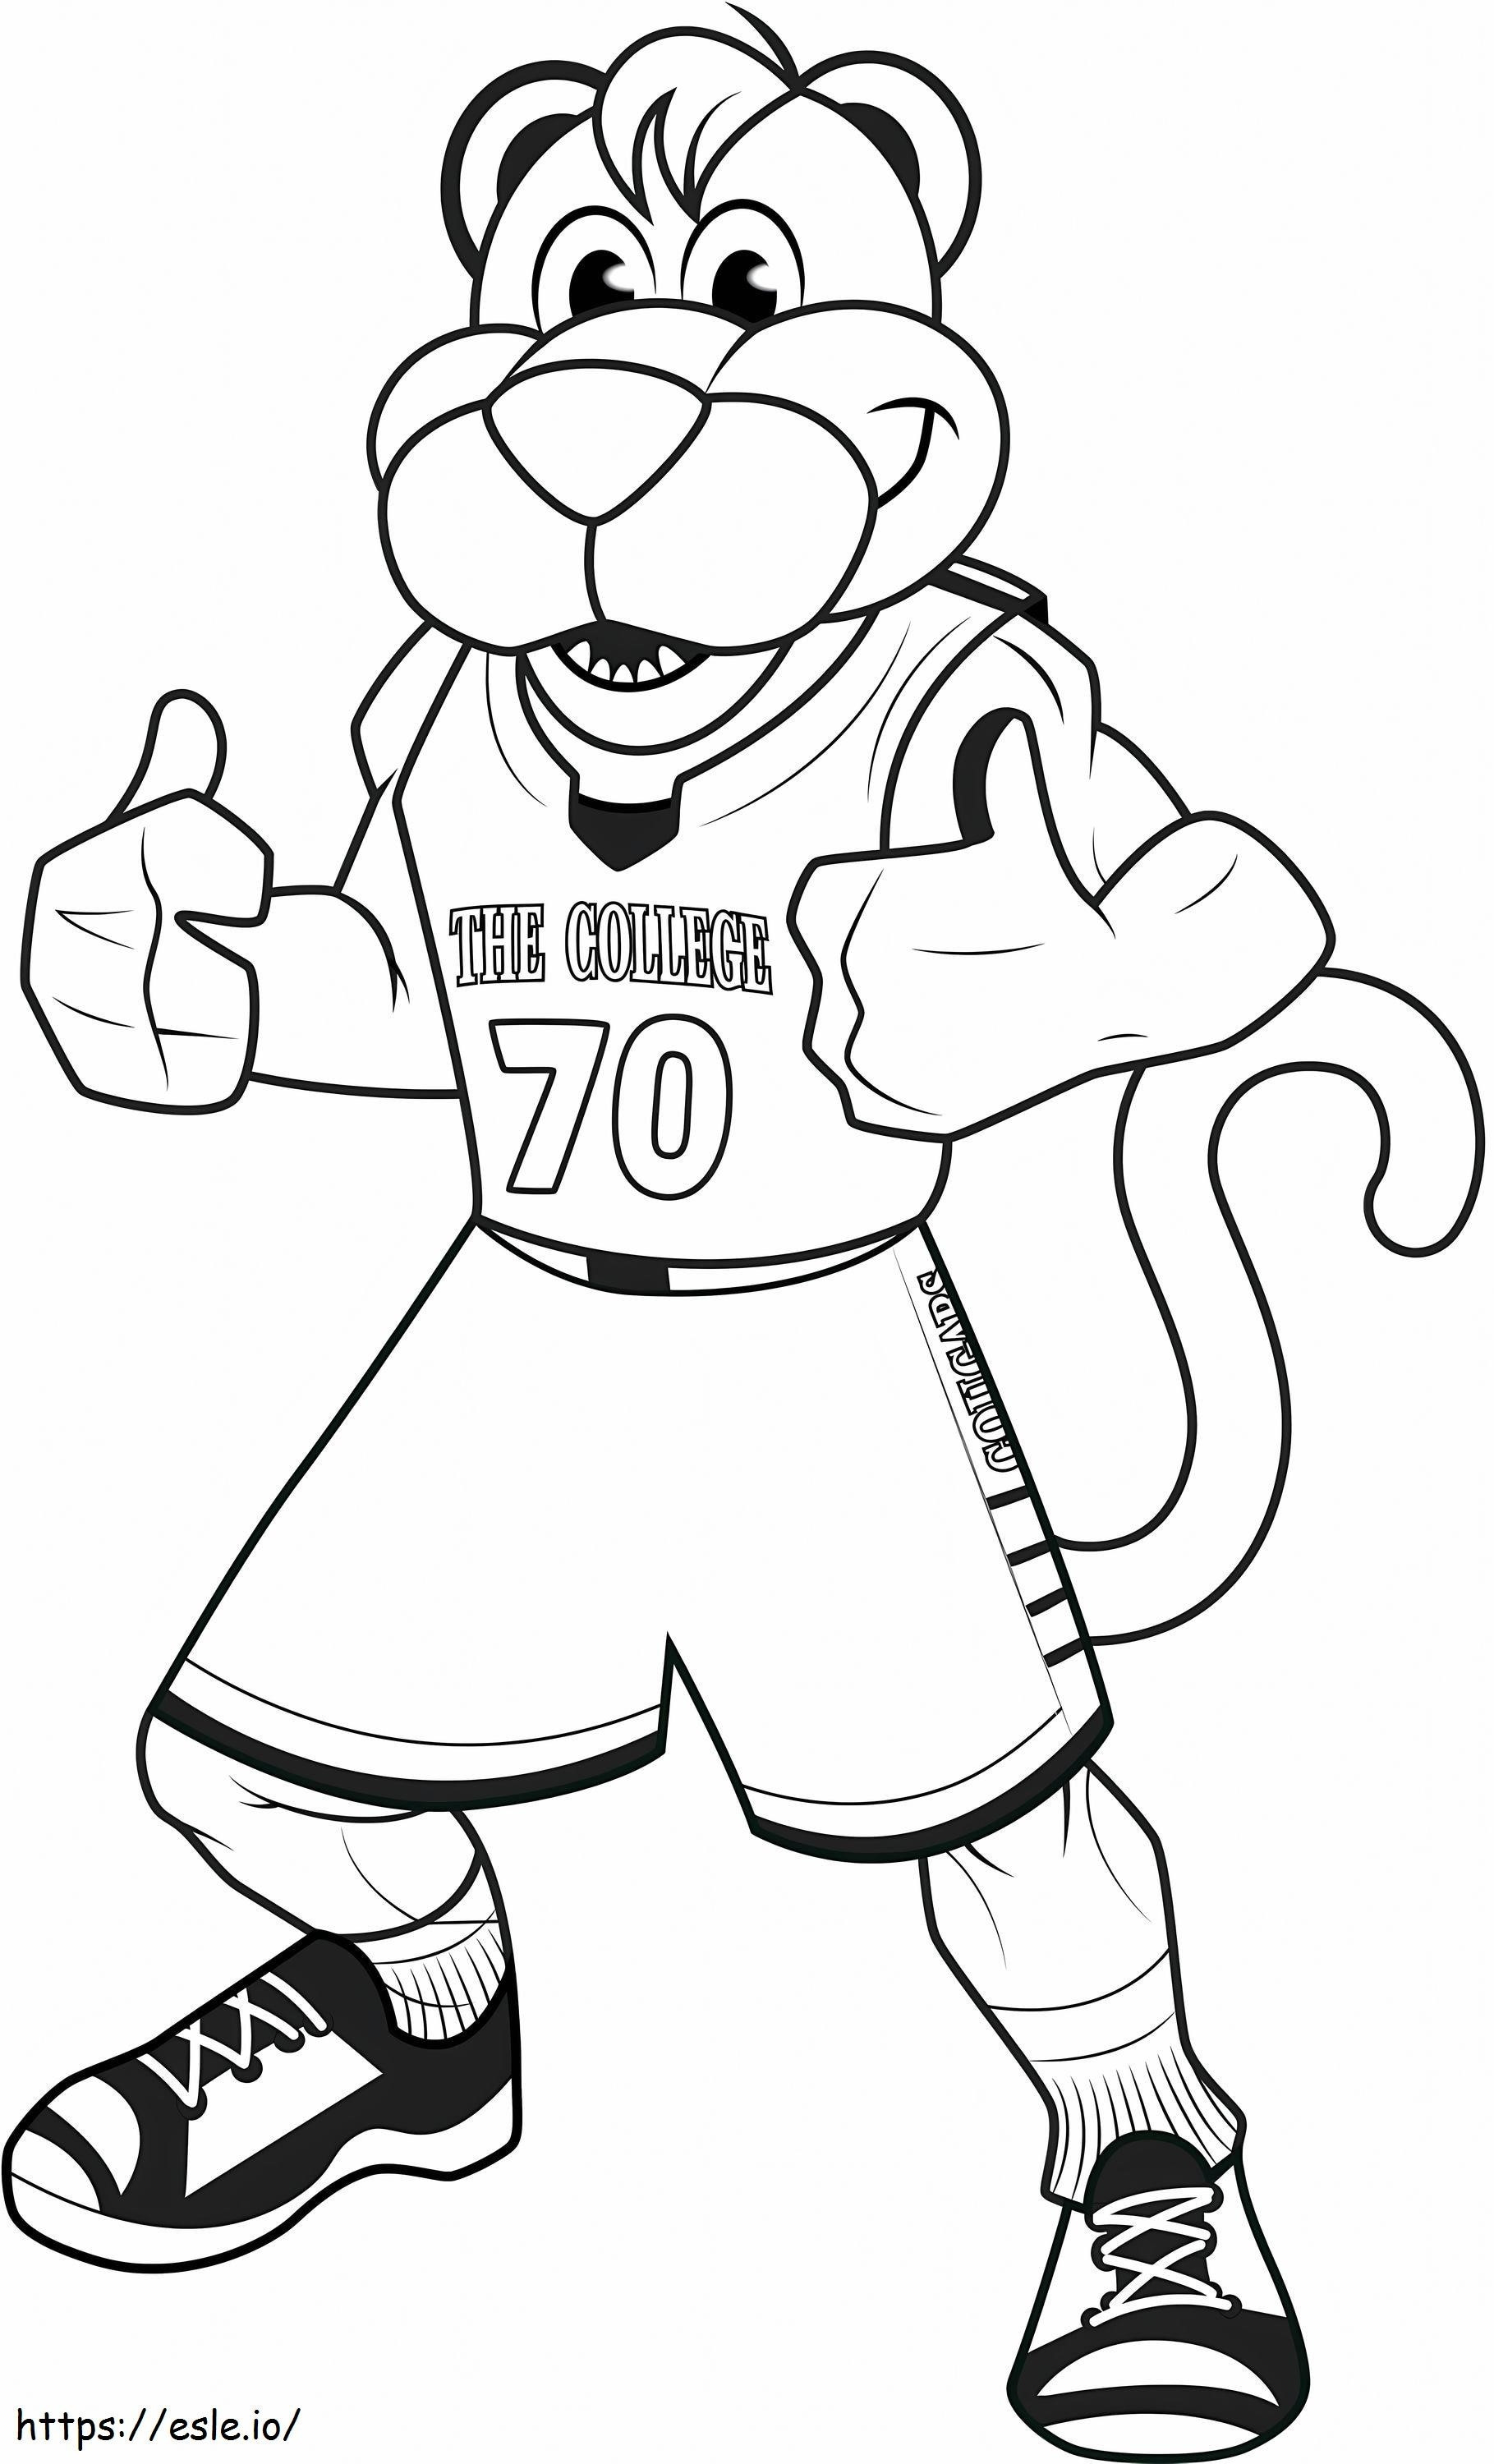 Cougar Soccer Player coloring page